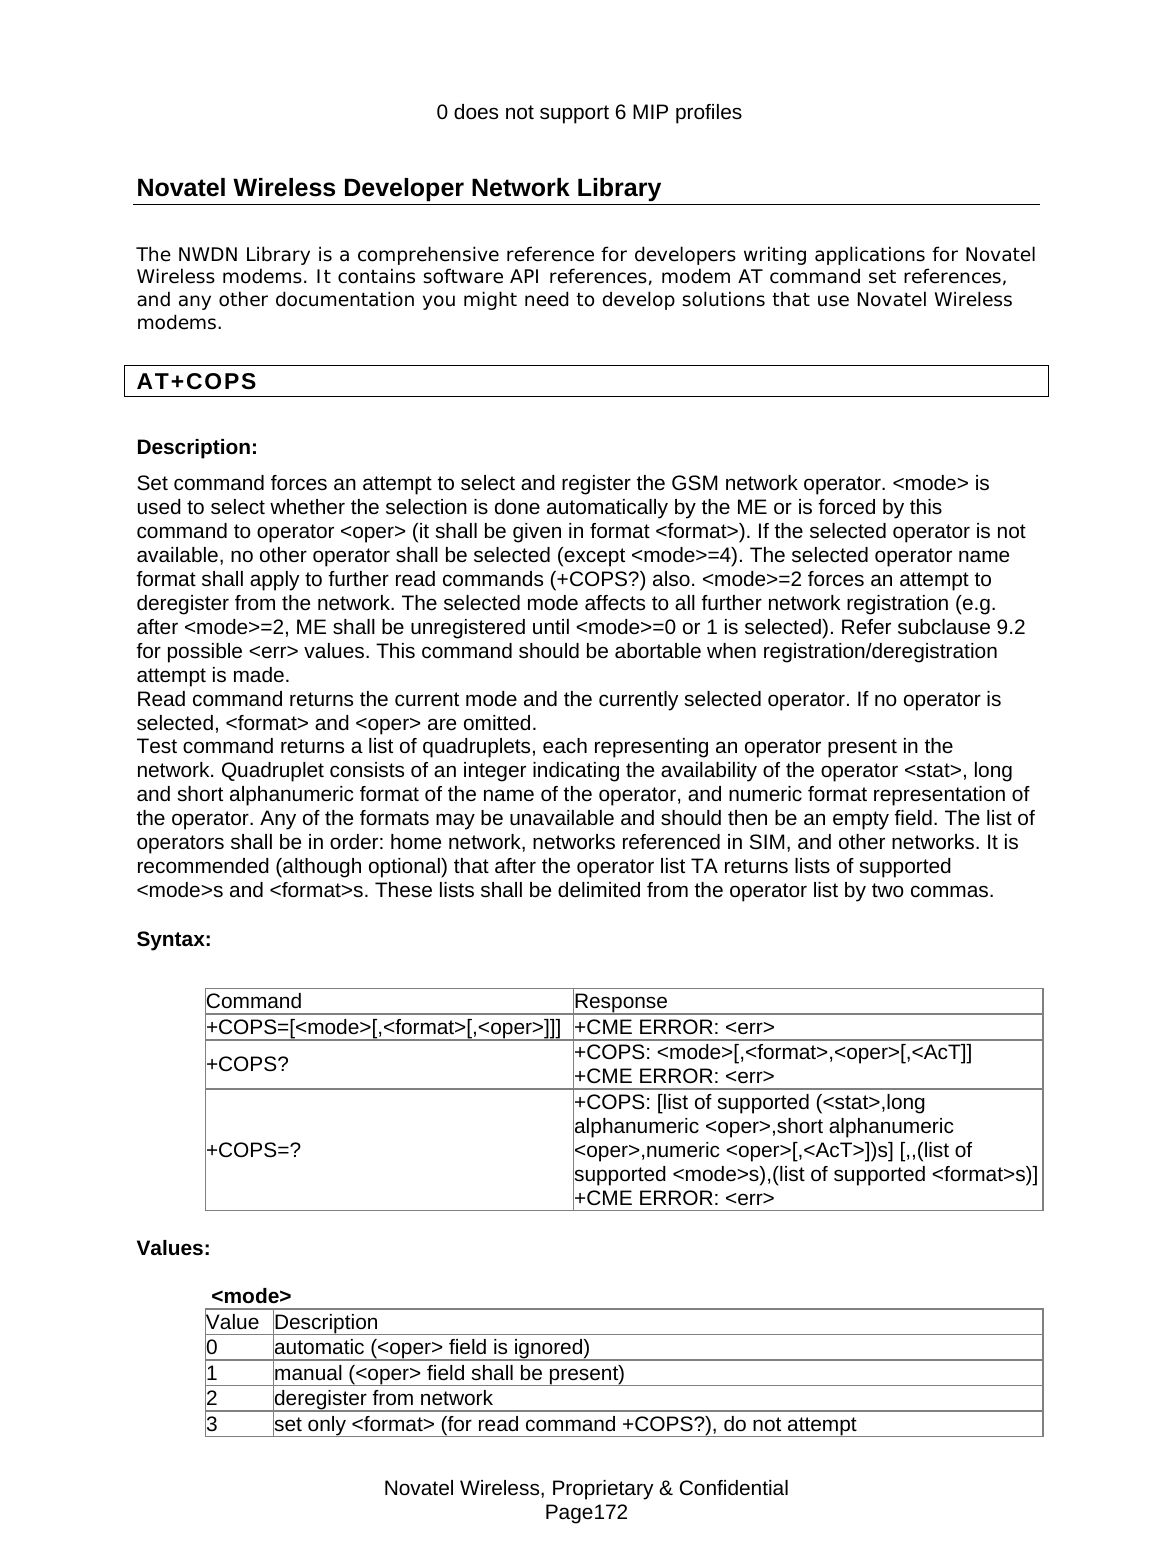 Novatel Wireless, Proprietary &amp; Confidential Page172                    0 does not support 6 MIP profiles  Novatel Wireless Developer Network Library The NWDN Library is a comprehensive reference for developers writing applications for Novatel Wireless modems. It contains software API references, modem AT command set references, and any other documentation you might need to develop solutions that use Novatel Wireless modems. AT+COPS Description: Set command forces an attempt to select and register the GSM network operator. &lt;mode&gt; is used to select whether the selection is done automatically by the ME or is forced by this command to operator &lt;oper&gt; (it shall be given in format &lt;format&gt;). If the selected operator is not available, no other operator shall be selected (except &lt;mode&gt;=4). The selected operator name format shall apply to further read commands (+COPS?) also. &lt;mode&gt;=2 forces an attempt to deregister from the network. The selected mode affects to all further network registration (e.g. after &lt;mode&gt;=2, ME shall be unregistered until &lt;mode&gt;=0 or 1 is selected). Refer subclause 9.2 for possible &lt;err&gt; values. This command should be abortable when registration/deregistration attempt is made. Read command returns the current mode and the currently selected operator. If no operator is selected, &lt;format&gt; and &lt;oper&gt; are omitted. Test command returns a list of quadruplets, each representing an operator present in the network. Quadruplet consists of an integer indicating the availability of the operator &lt;stat&gt;, long and short alphanumeric format of the name of the operator, and numeric format representation of the operator. Any of the formats may be unavailable and should then be an empty field. The list of operators shall be in order: home network, networks referenced in SIM, and other networks. It is recommended (although optional) that after the operator list TA returns lists of supported &lt;mode&gt;s and &lt;format&gt;s. These lists shall be delimited from the operator list by two commas. Syntax:  Command Response +COPS=[&lt;mode&gt;[,&lt;format&gt;[,&lt;oper&gt;]]] +CME ERROR: &lt;err&gt; +COPS?  +COPS: &lt;mode&gt;[,&lt;format&gt;,&lt;oper&gt;[,&lt;AcT]] +CME ERROR: &lt;err&gt; +COPS=? +COPS: [list of supported (&lt;stat&gt;,long alphanumeric &lt;oper&gt;,short alphanumeric &lt;oper&gt;,numeric &lt;oper&gt;[,&lt;AcT&gt;])s] [,,(list of supported &lt;mode&gt;s),(list of supported &lt;format&gt;s)]+CME ERROR: &lt;err&gt; Values: &lt;mode&gt; Value Description 0  automatic (&lt;oper&gt; field is ignored) 1  manual (&lt;oper&gt; field shall be present) 2  deregister from network 3  set only &lt;format&gt; (for read command +COPS?), do not attempt 